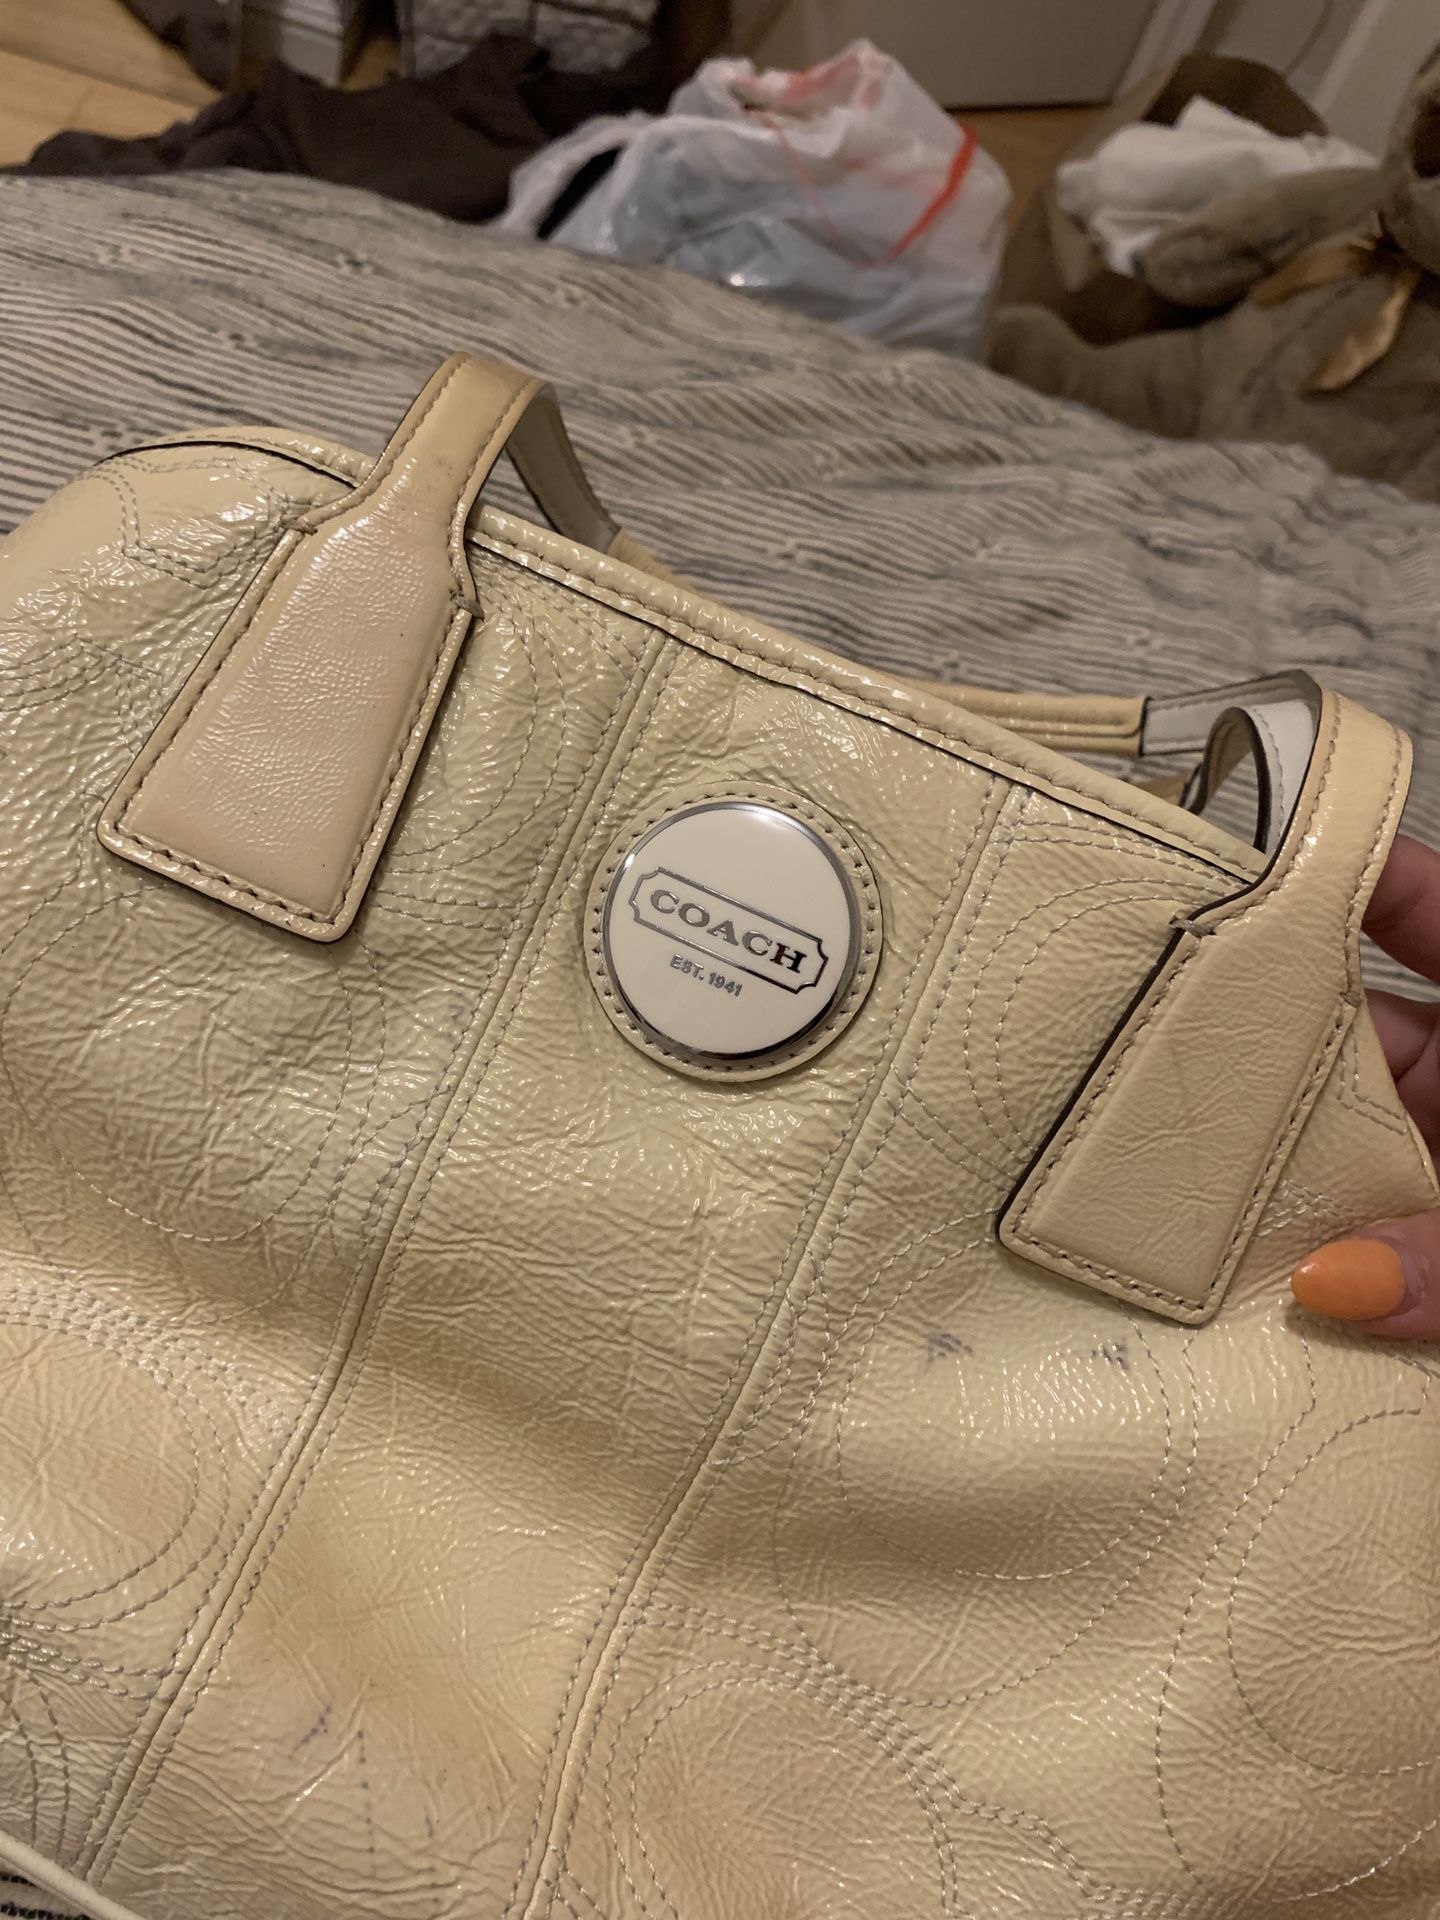 Coach Laptop Bag for Sale in Portland, OR - OfferUp